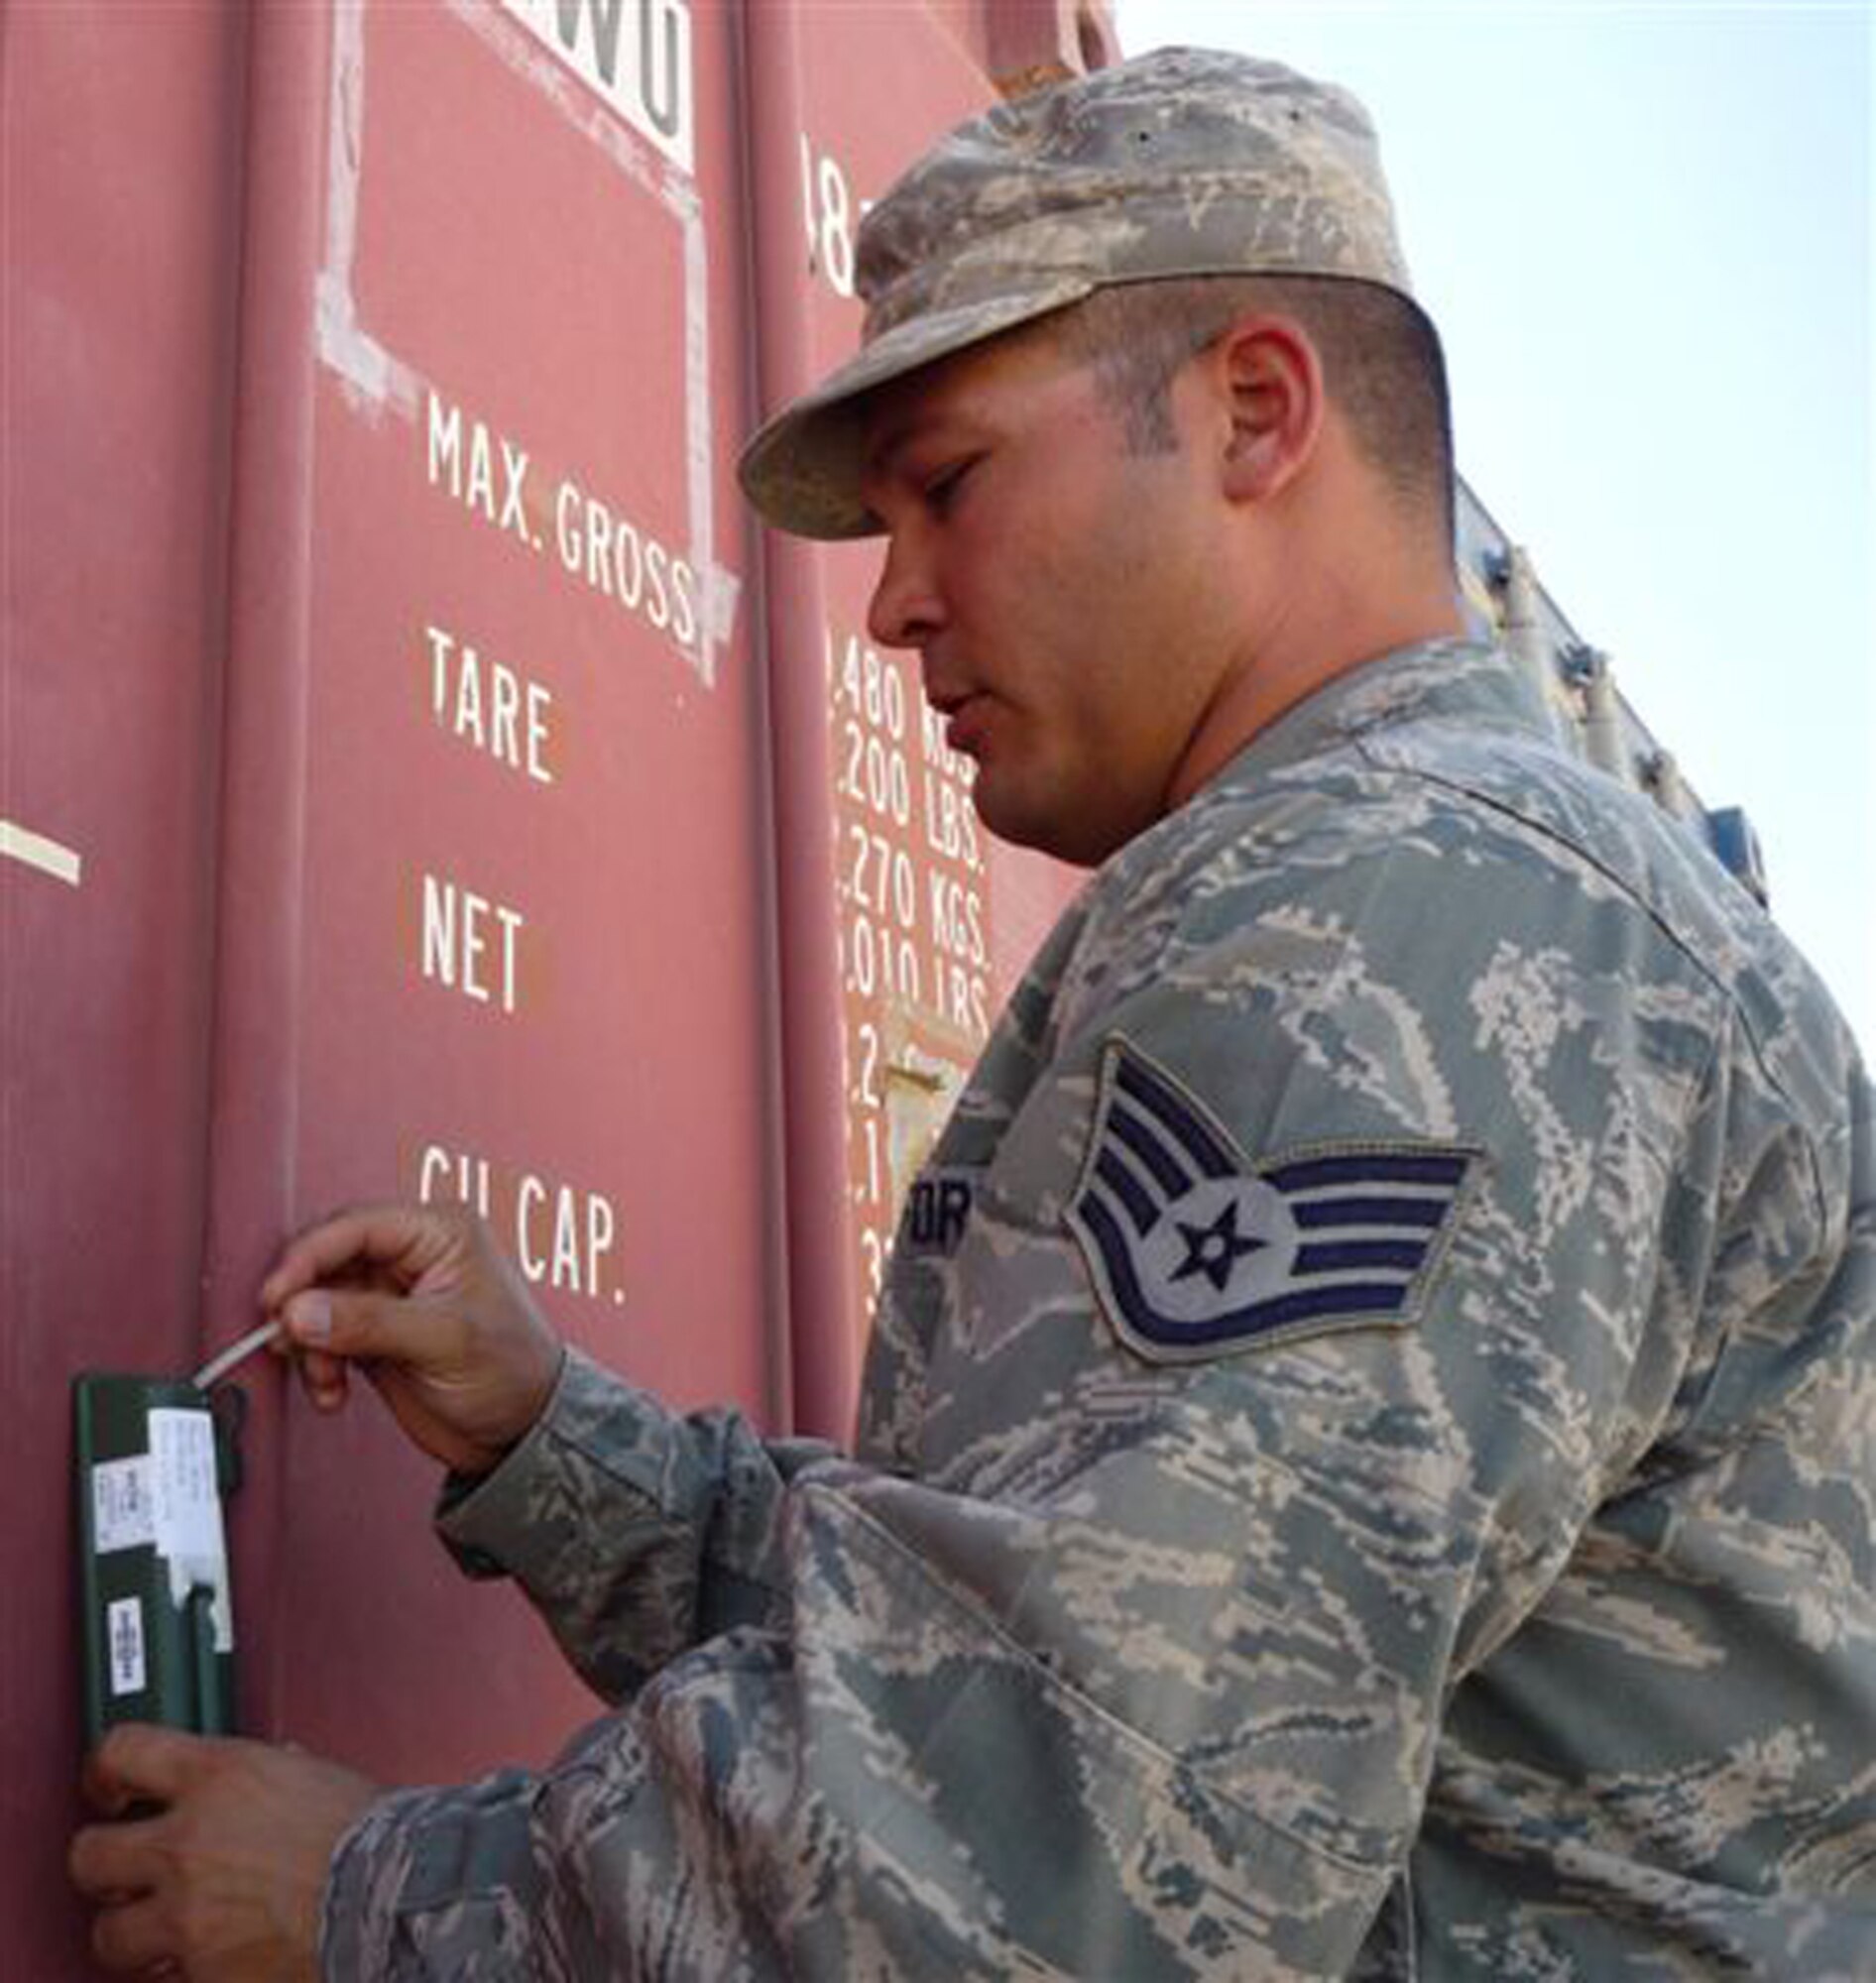 CAMP BUCCA, Iraq -- Staff Sgt. Will Engle, 732nd Movement Control Team Joint Distribution Center NCO in charge, affixes a radio frequency identification tag to a shipping container Sept. 27, 2009, before a movement out of Camp Bucca, Iraq. Sergeant Engle is deployed from the 436th Aerial Port Squadron at Dover Air Force Base, Del. (Photo by Army Sgt. Mark Berken)